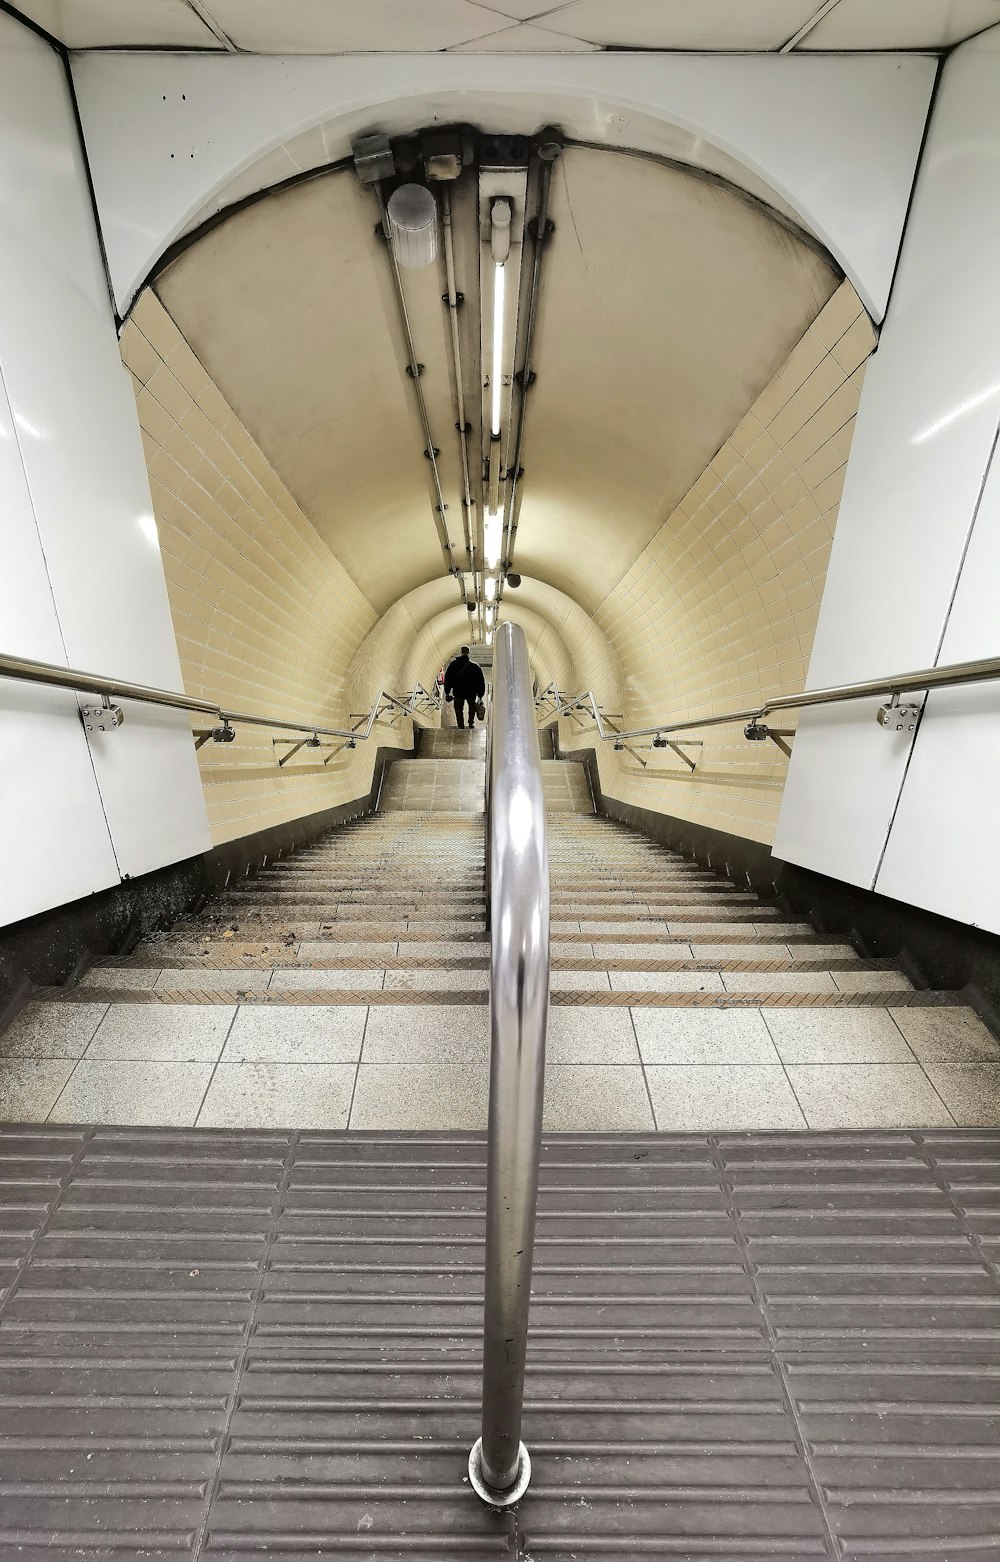 an escalator in a subway station with tiled flooring